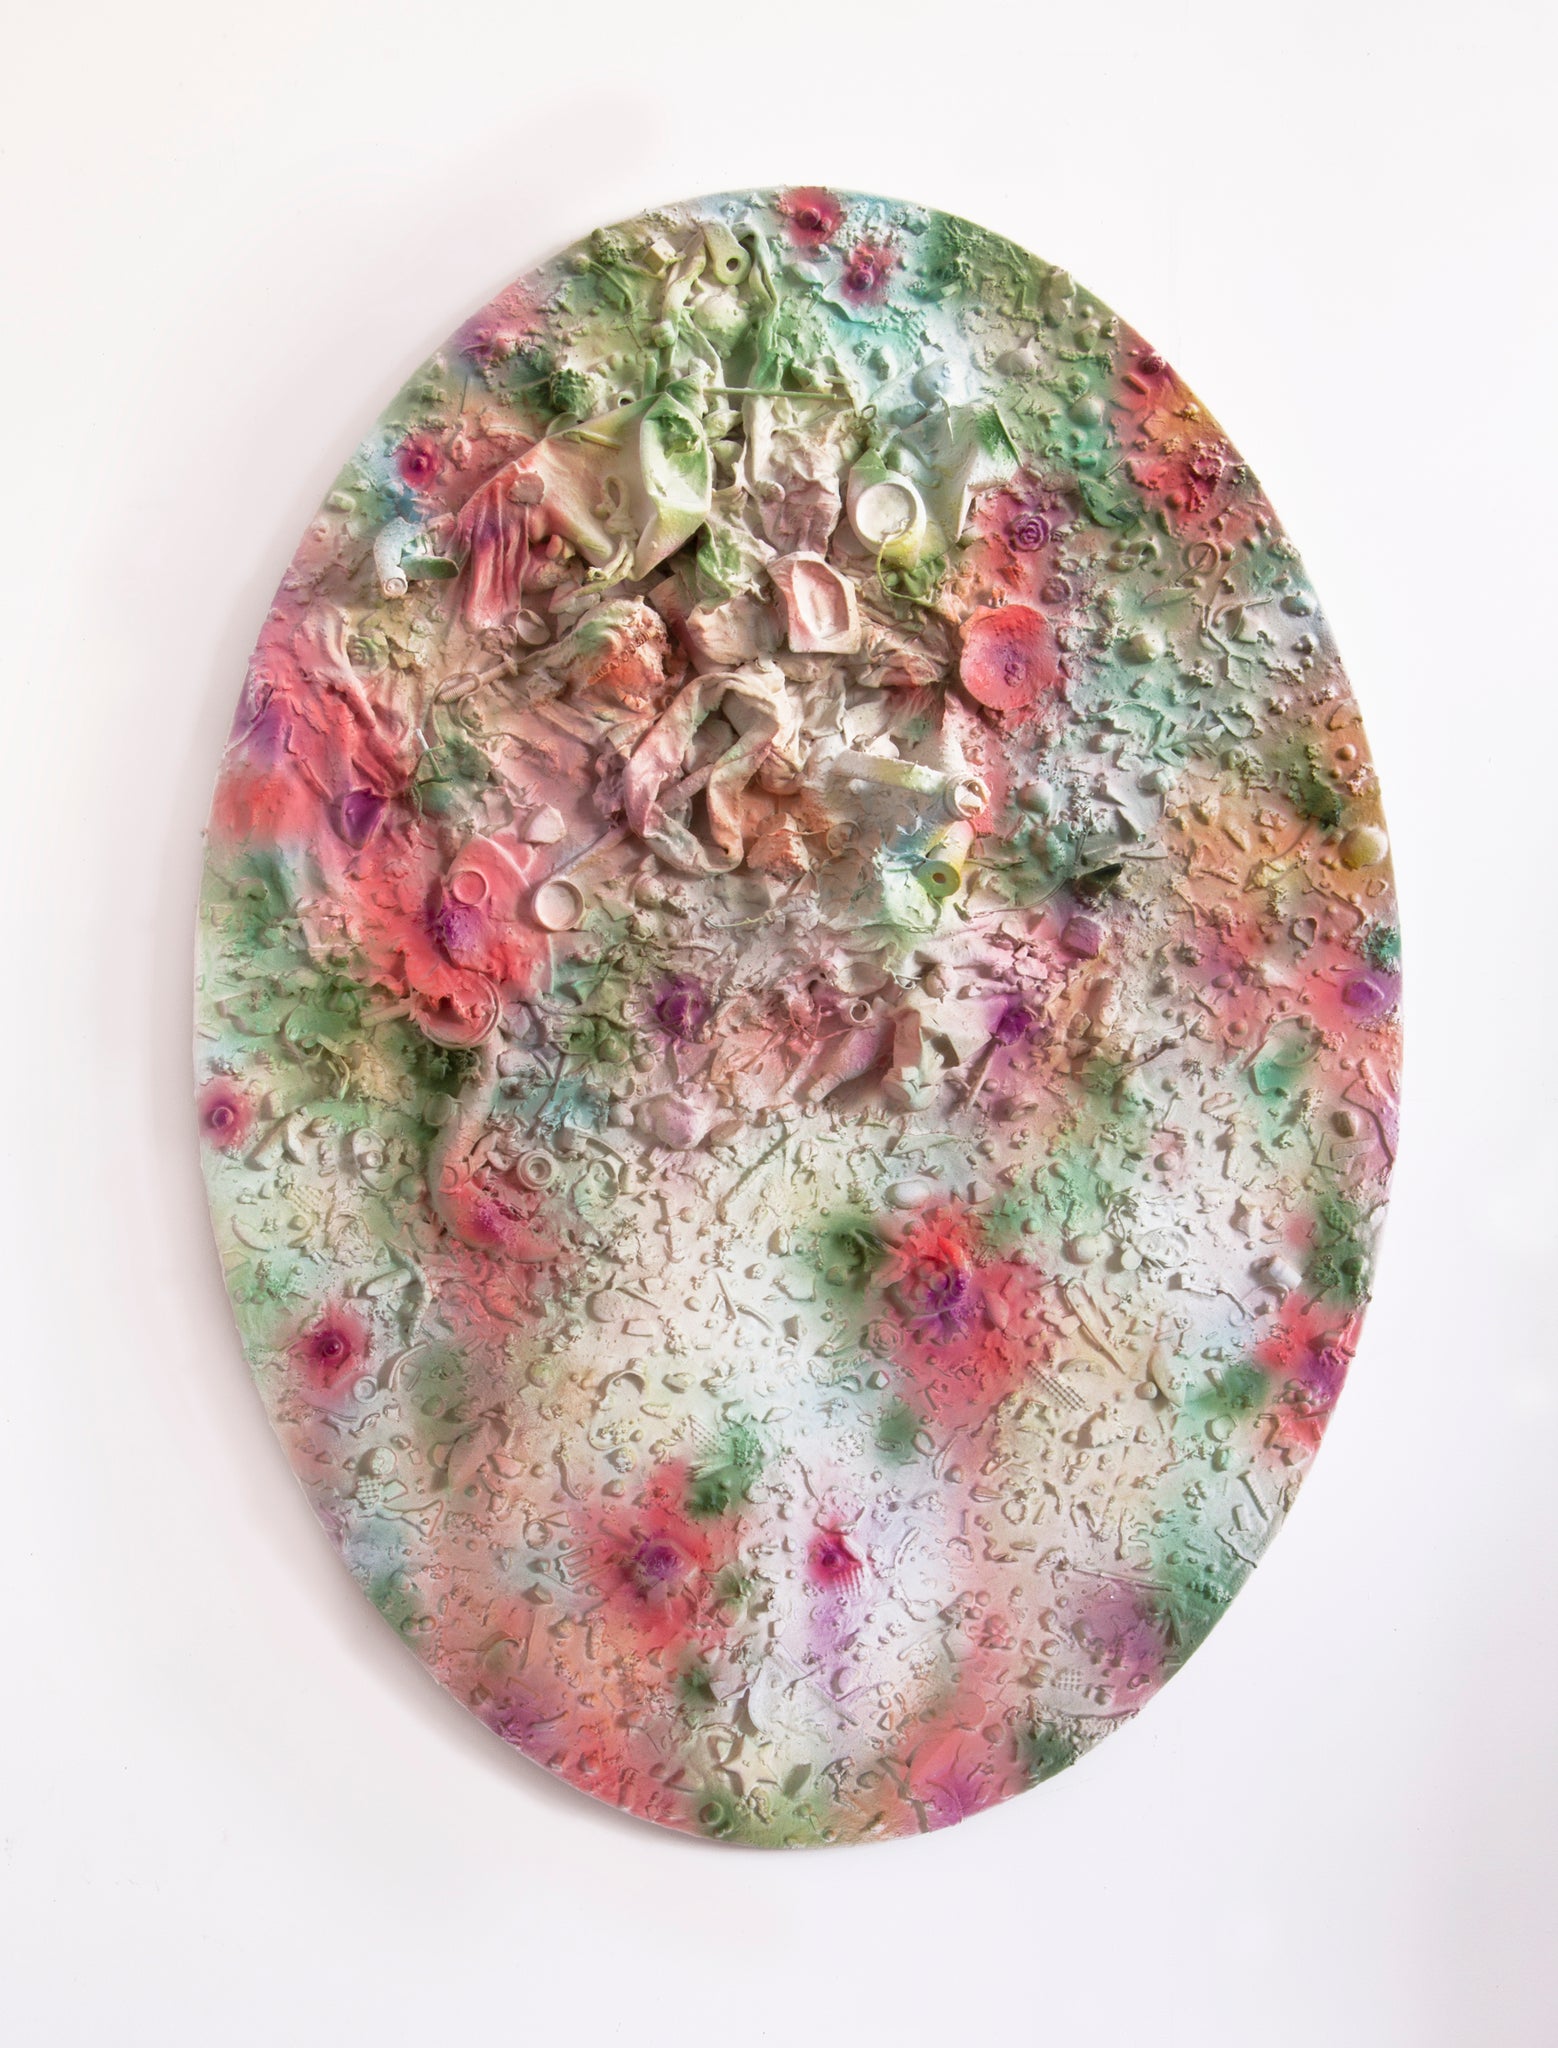 Anna Breininger + Kristin Cammermeyer, "Refuse Aggregate in Diffused Floral (Large Oval)"